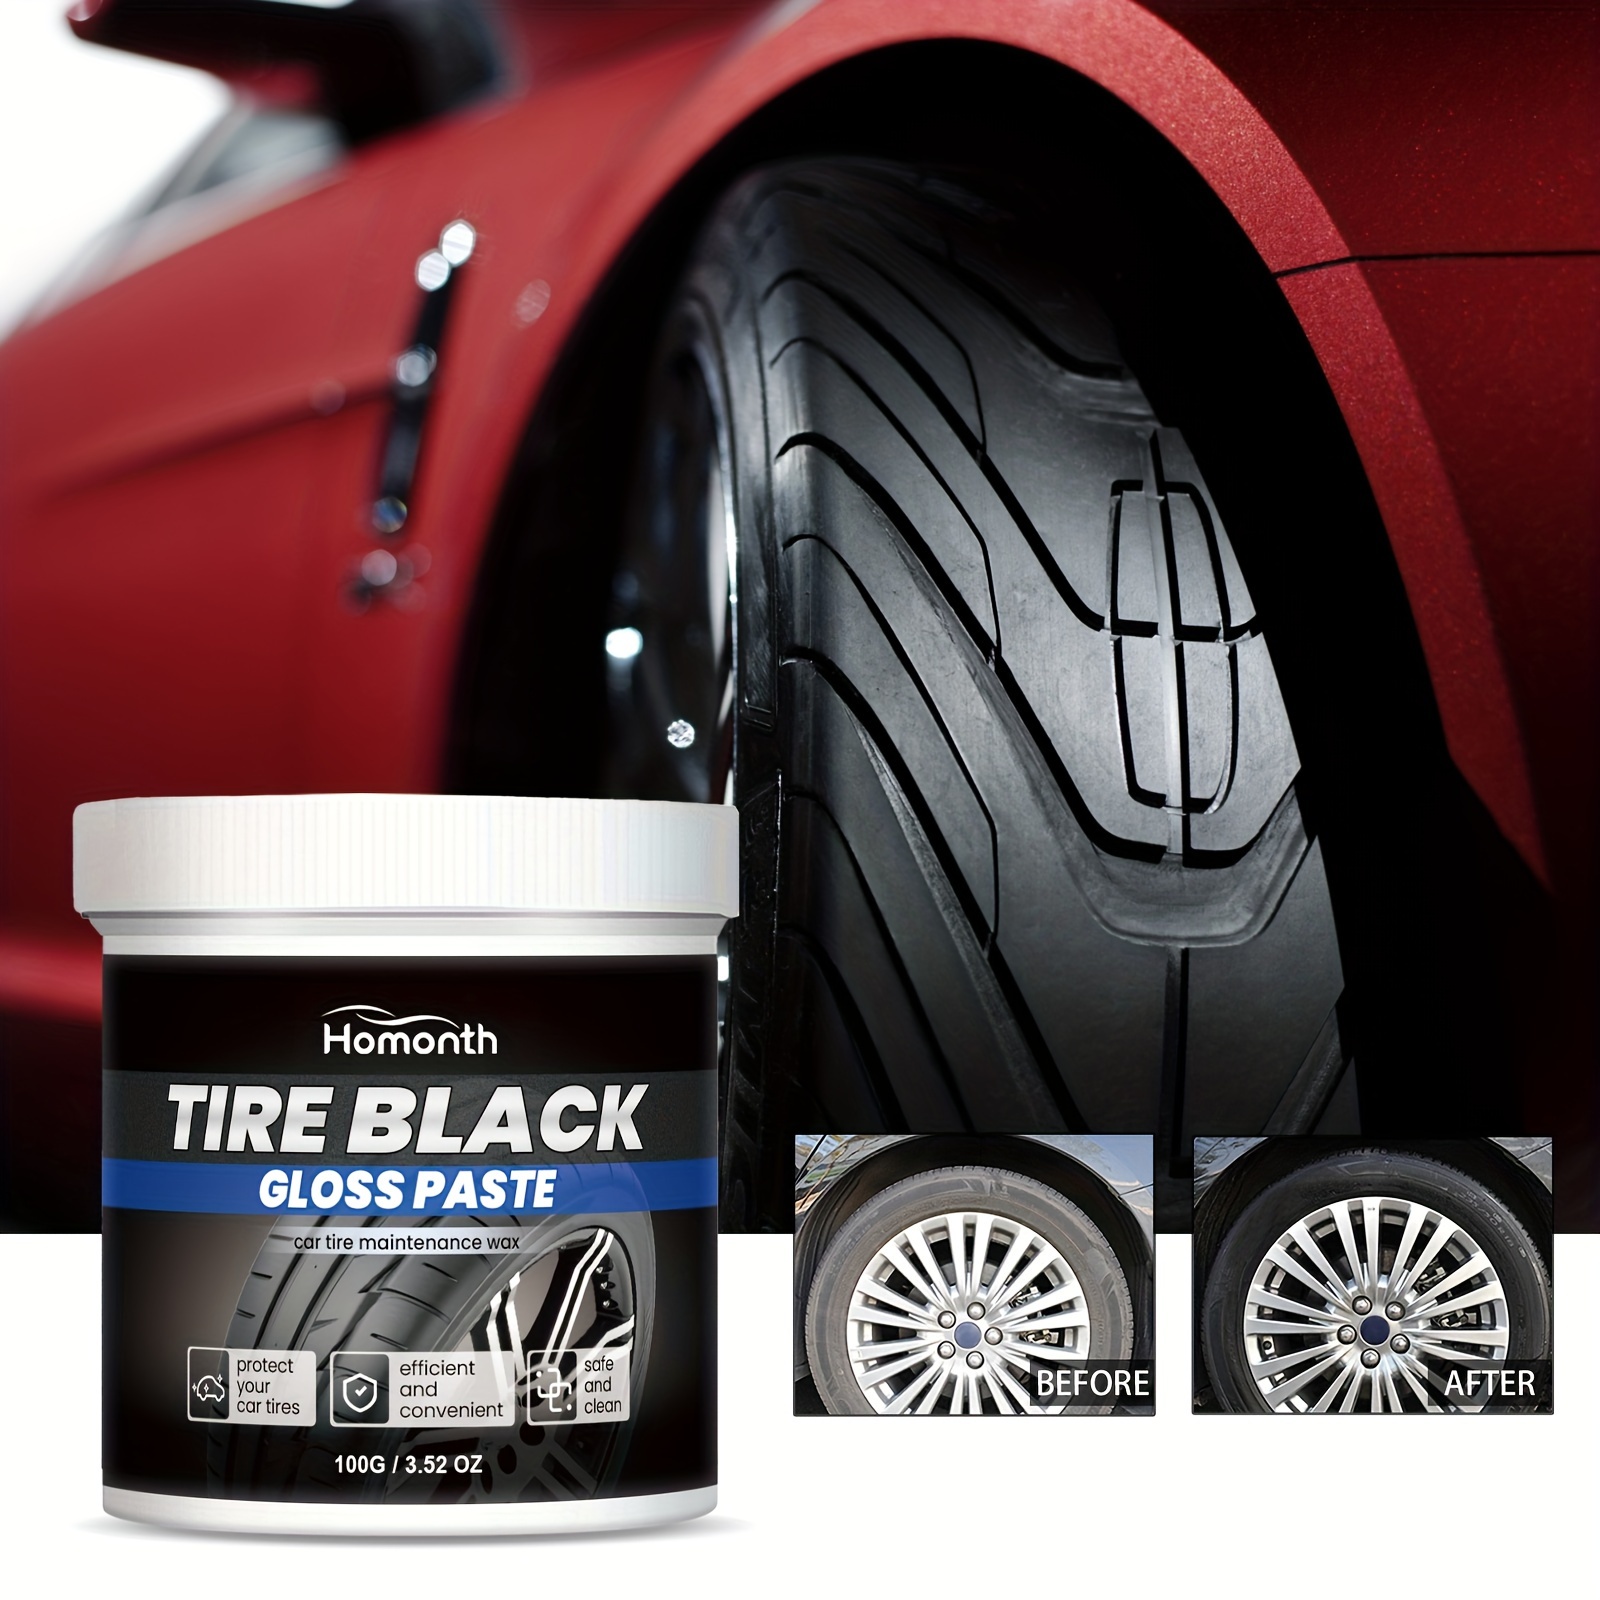 

Automobile Tire Maintenance Cream. Tire Cleaning, Decontamination, Brightening, Durable Rust Removal And